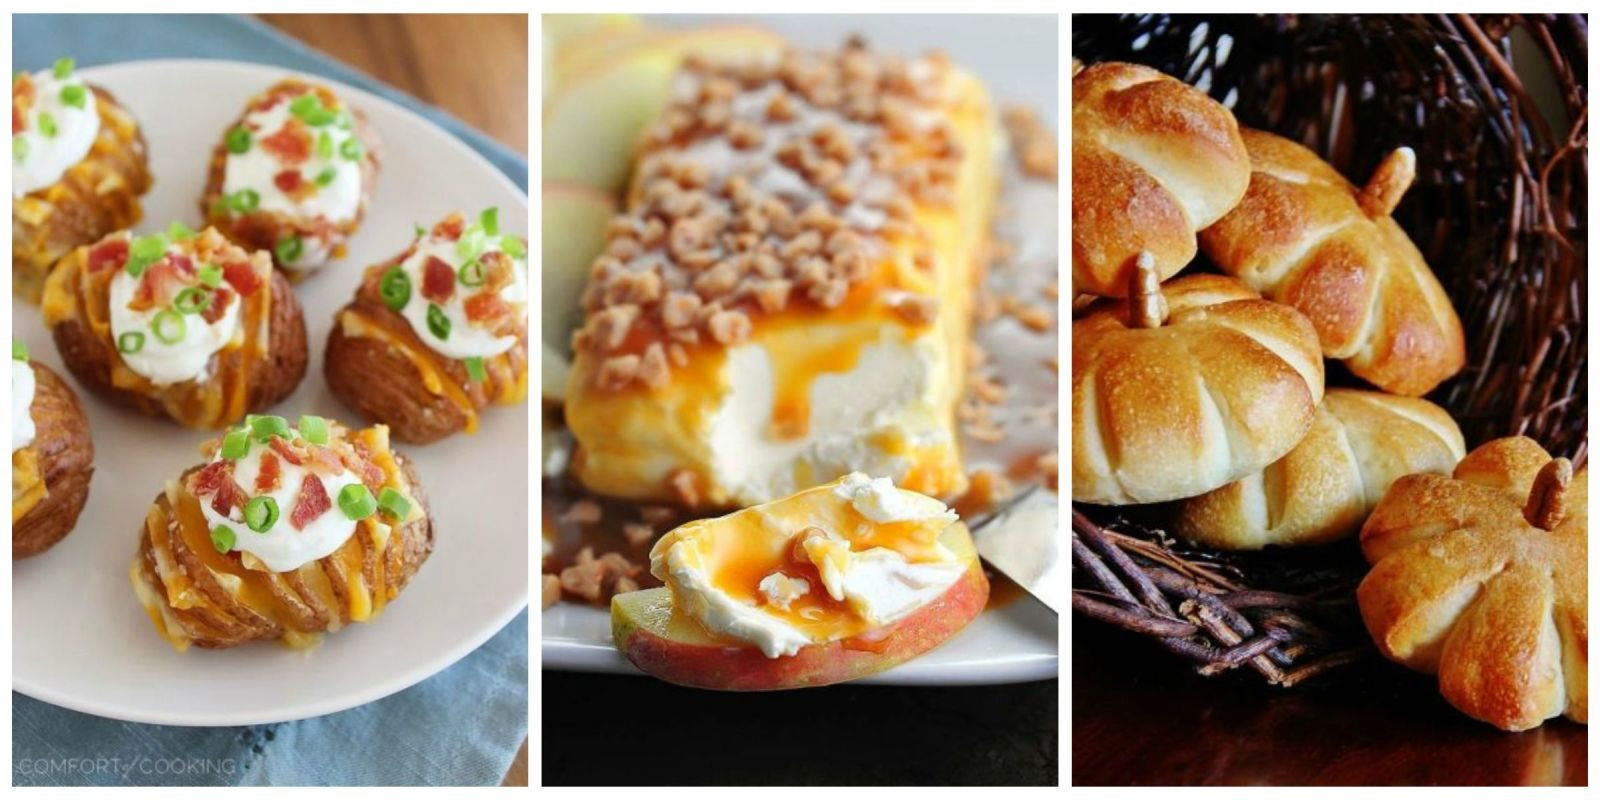 Simple Thanksgiving Appetizers
 34 Easy Thanksgiving Appetizers Best Recipes for